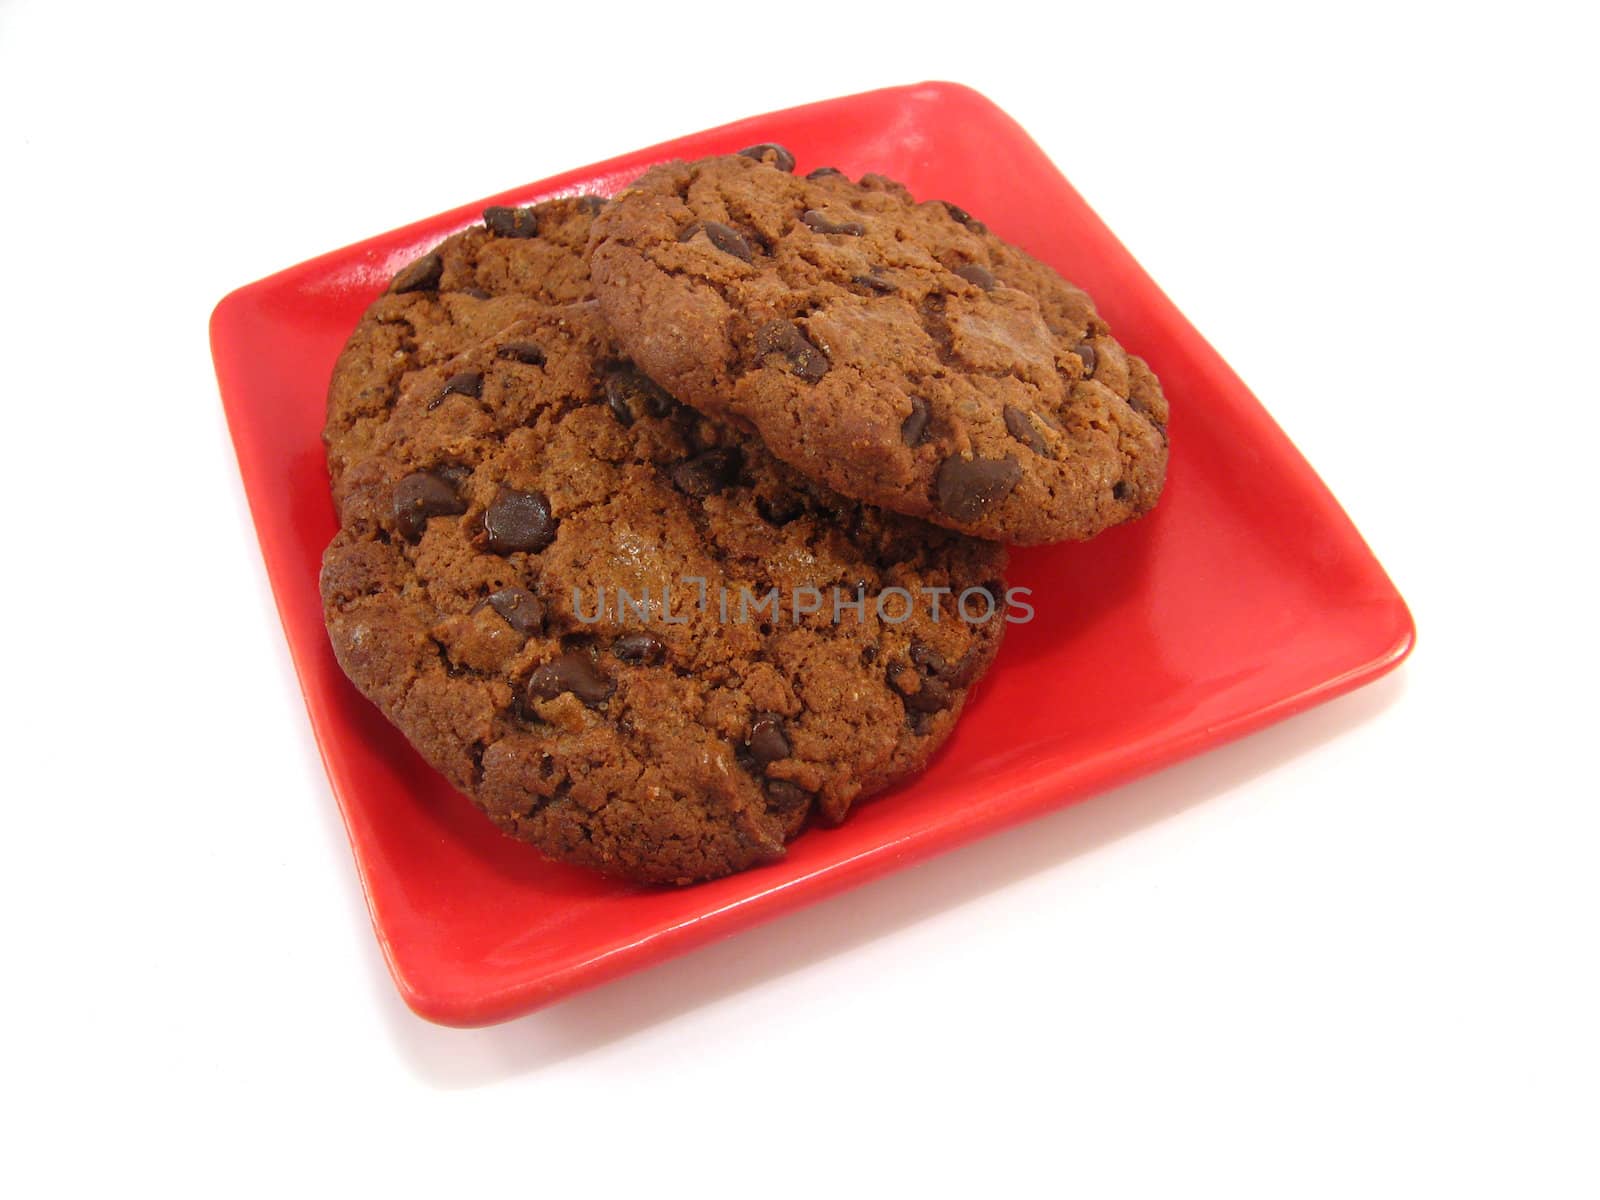 chocolate cookies on a red plate by jbouzou